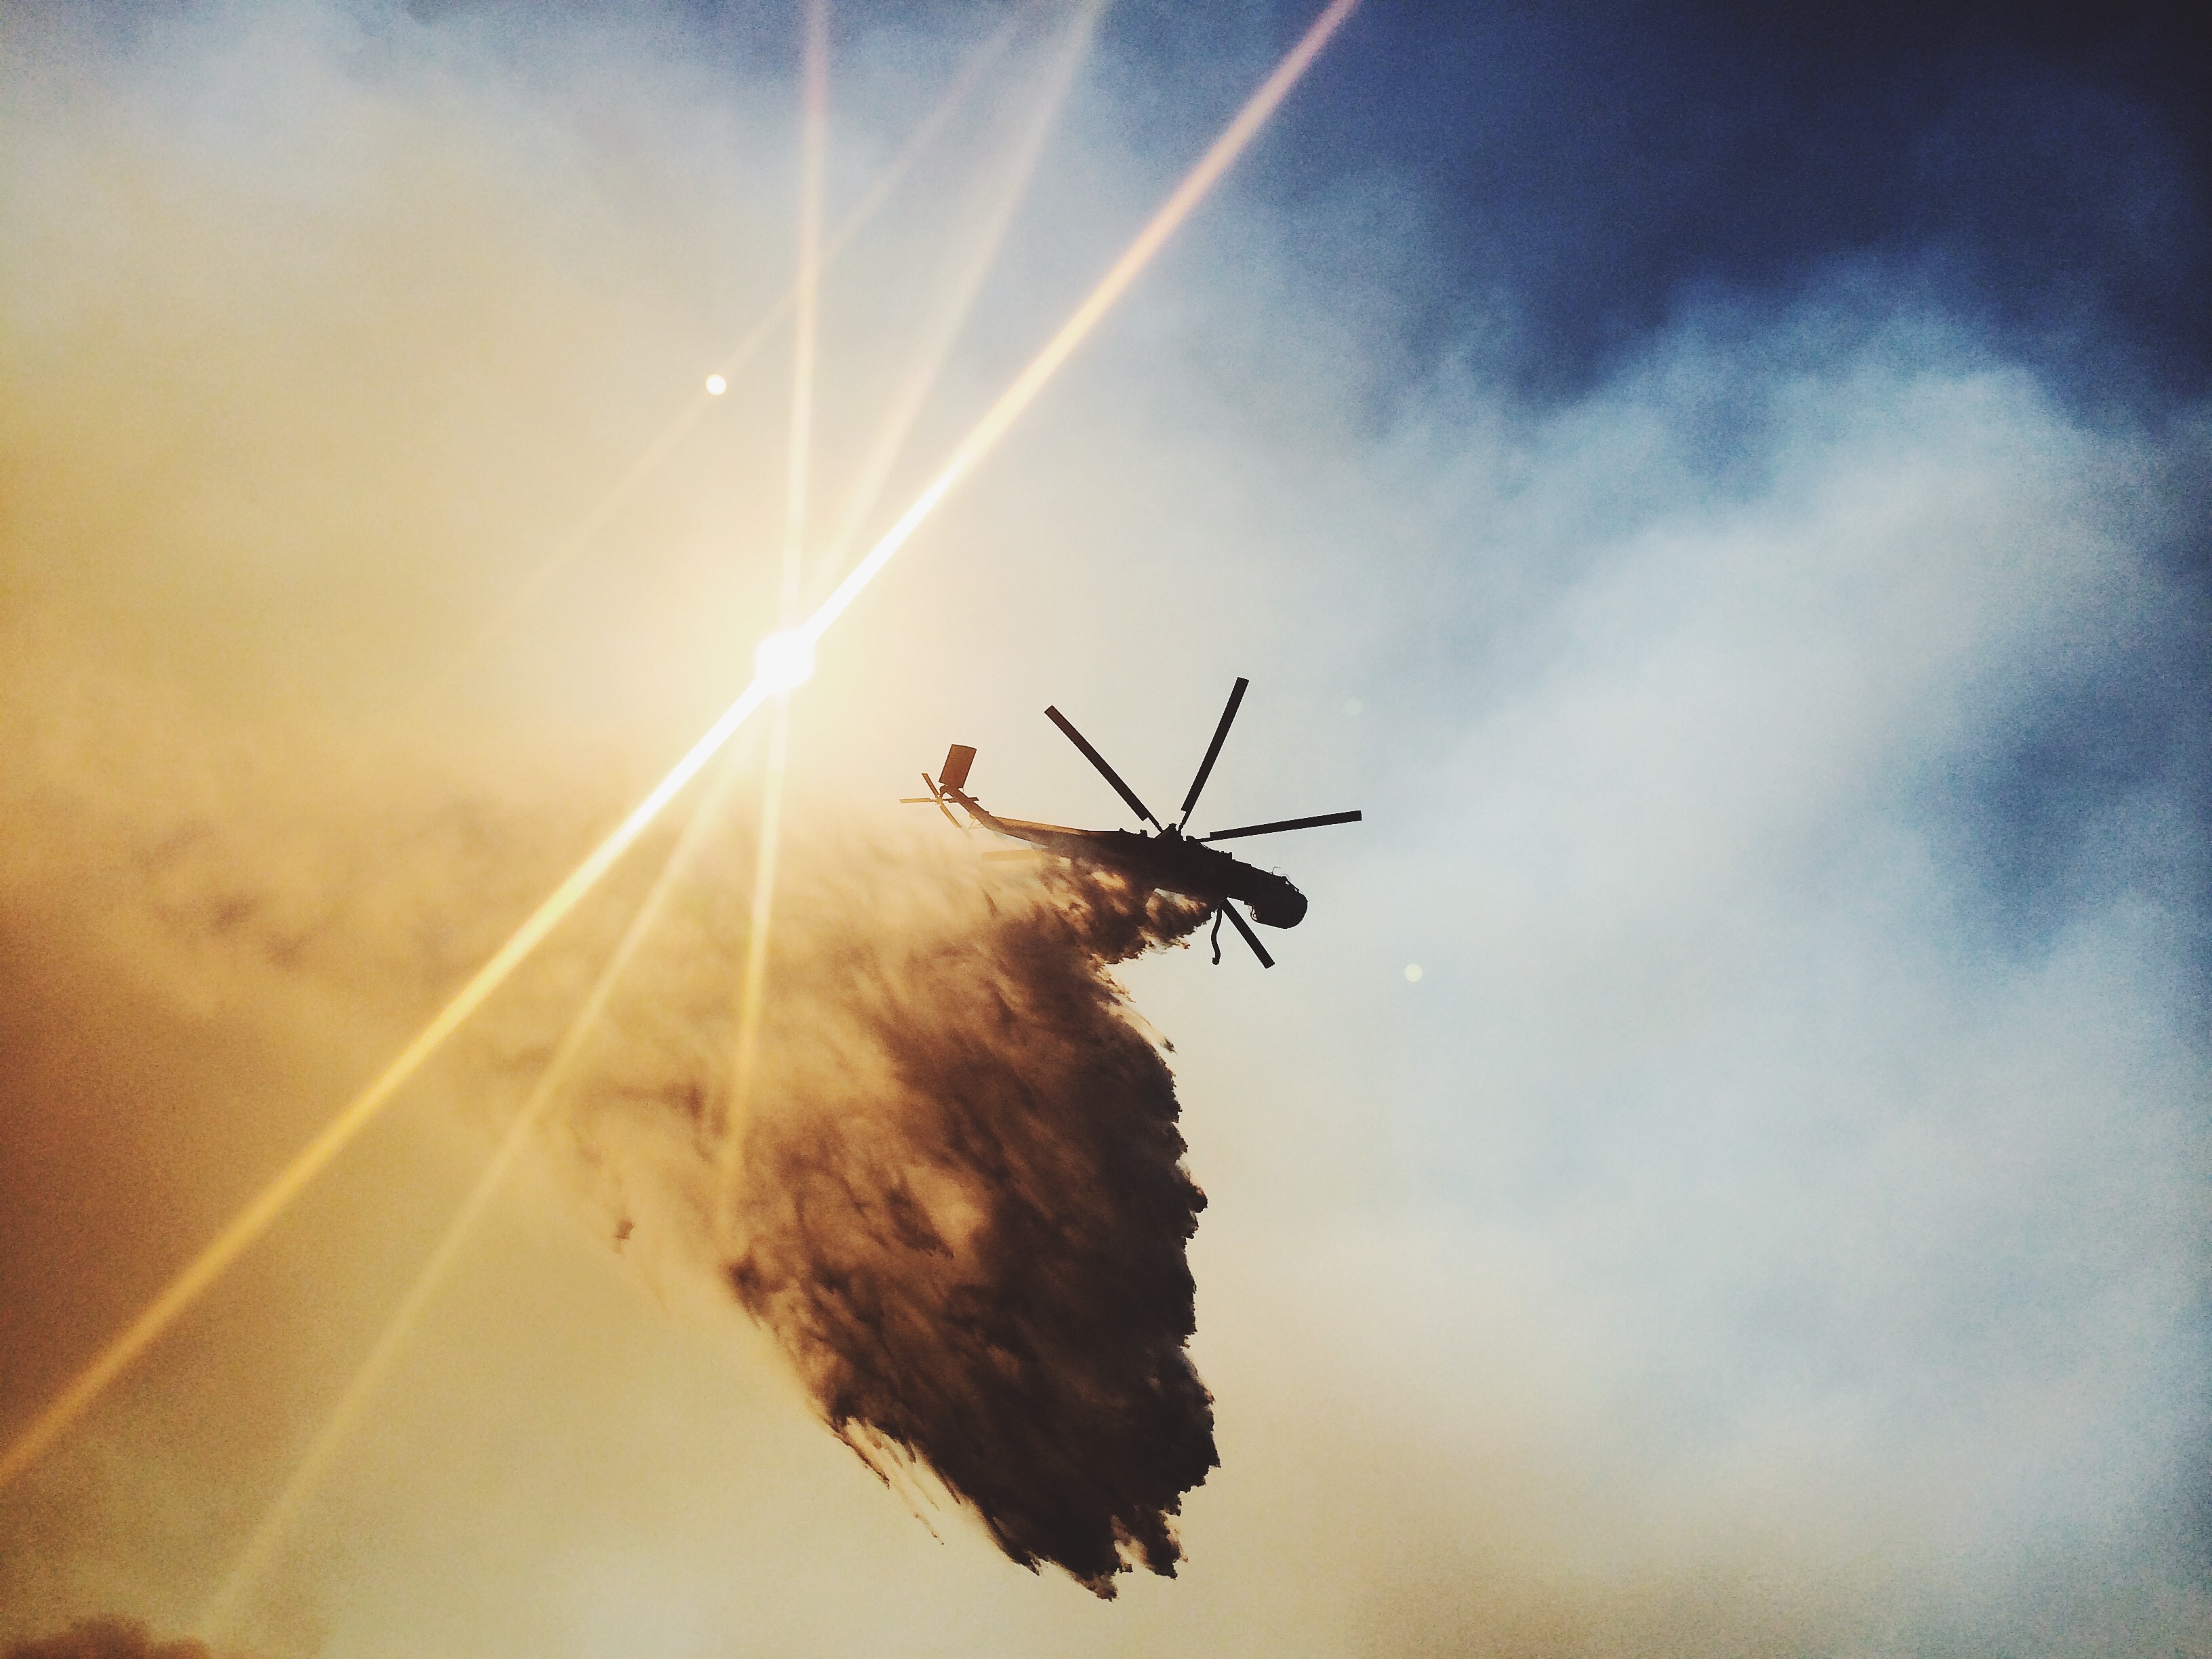 Helicopter fighting wildland fire. Photo taken by ExpertVoice Expert Gregg Boydston.